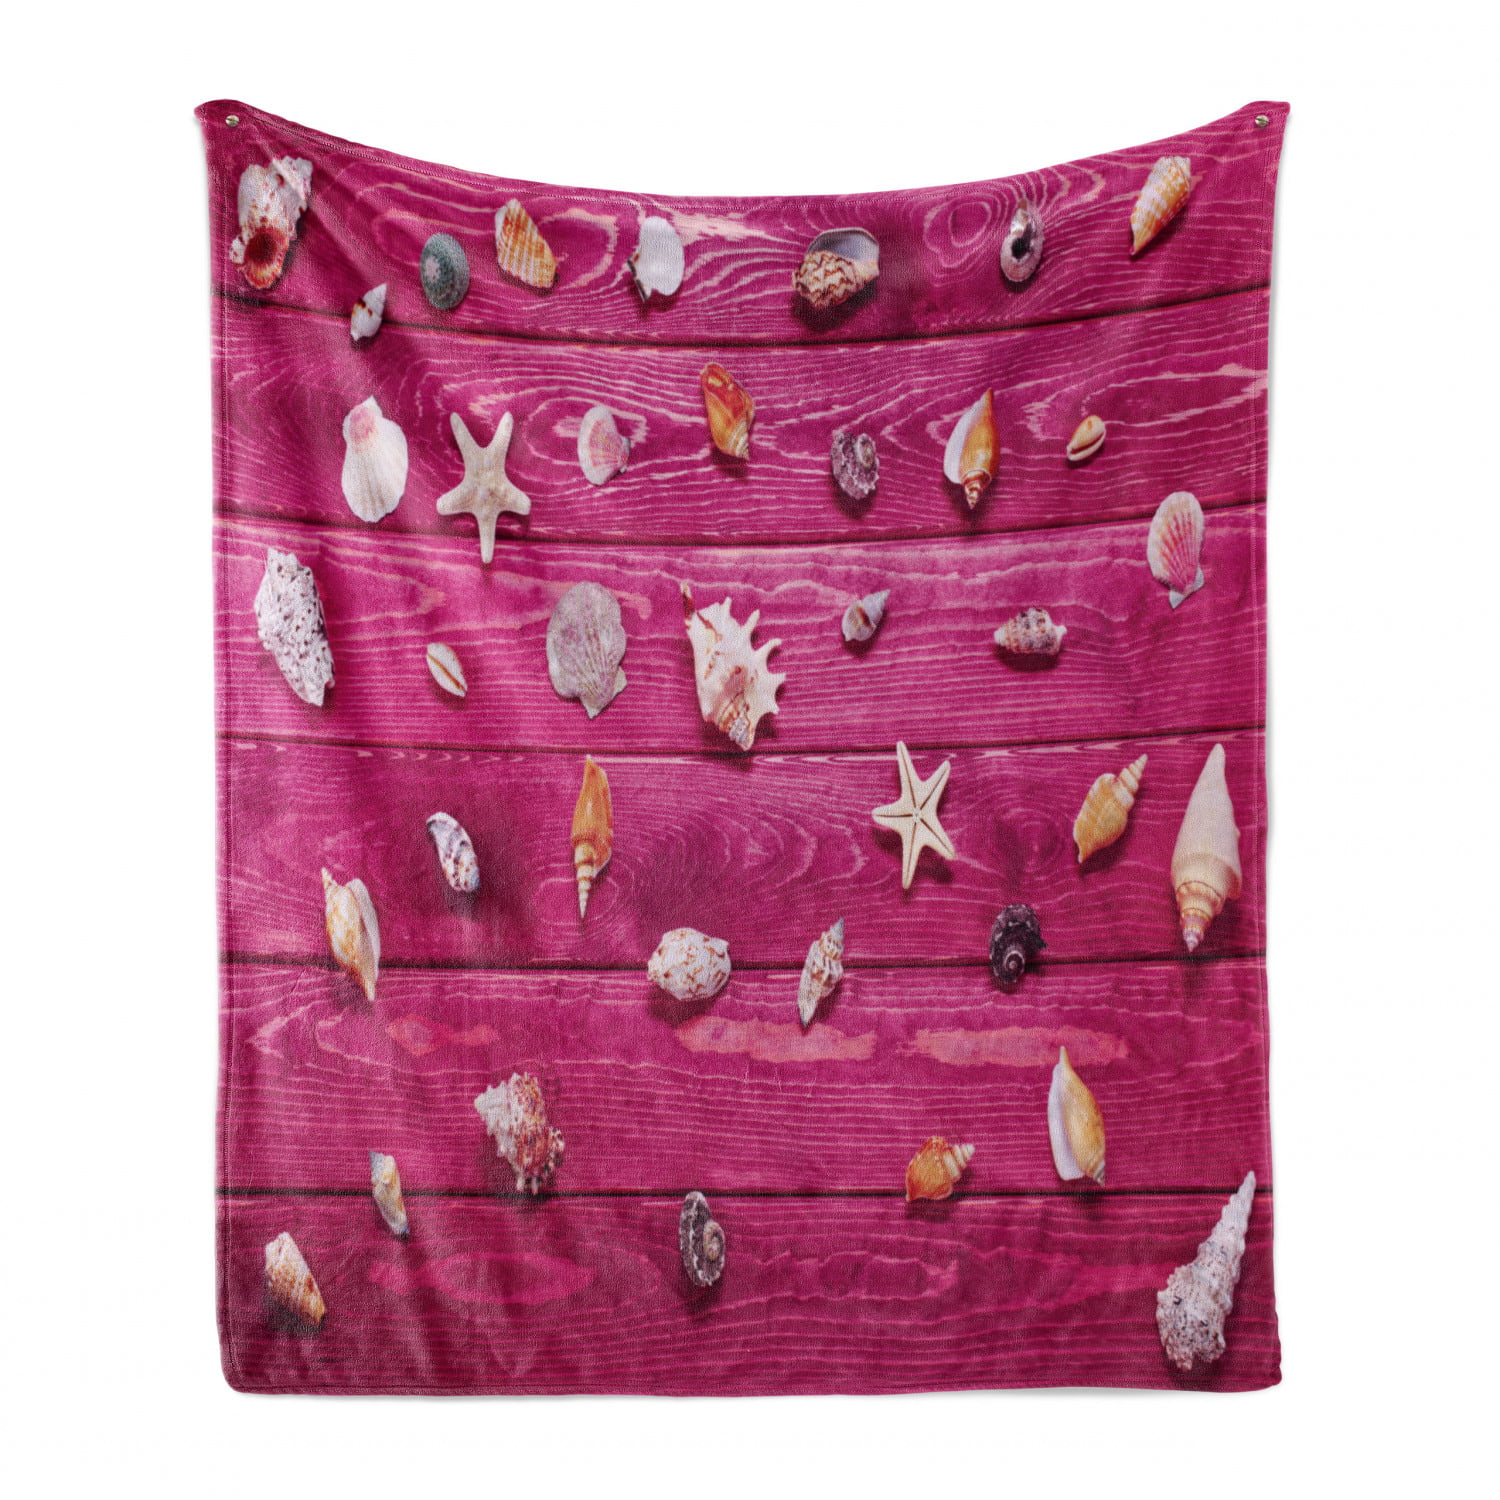 Little Sea Shells on The Vintage Marine Coast Tropical Life Themed Image 70 x 90 Cozy Plush for Indoor and Outdoor Use Cream and Fuchsia Ambesonne Rustic Soft Flannel Fleece Throw Blanket